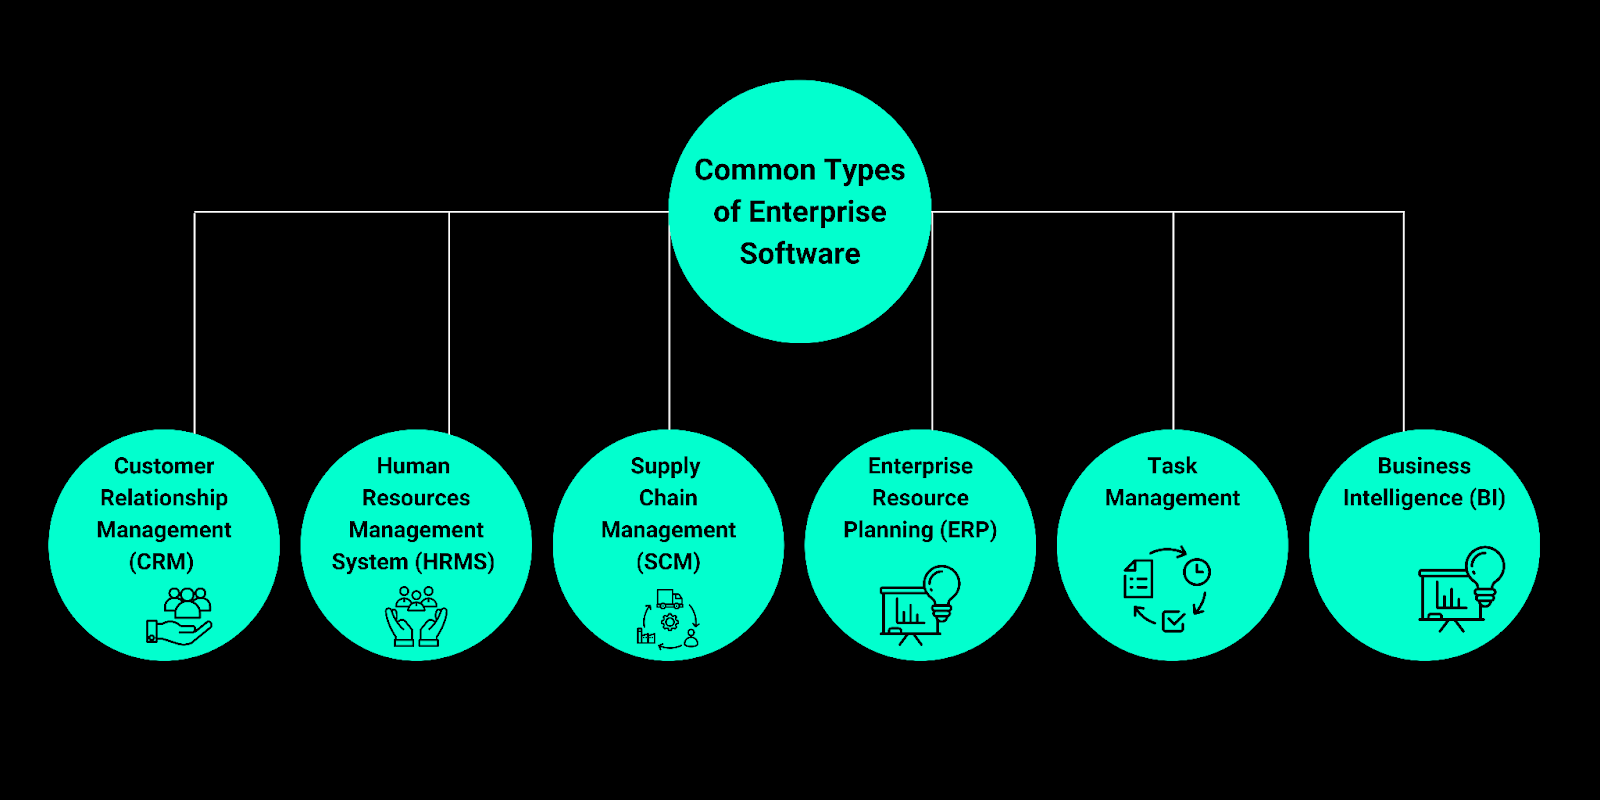 Graphic depicting the common types of enterprise software